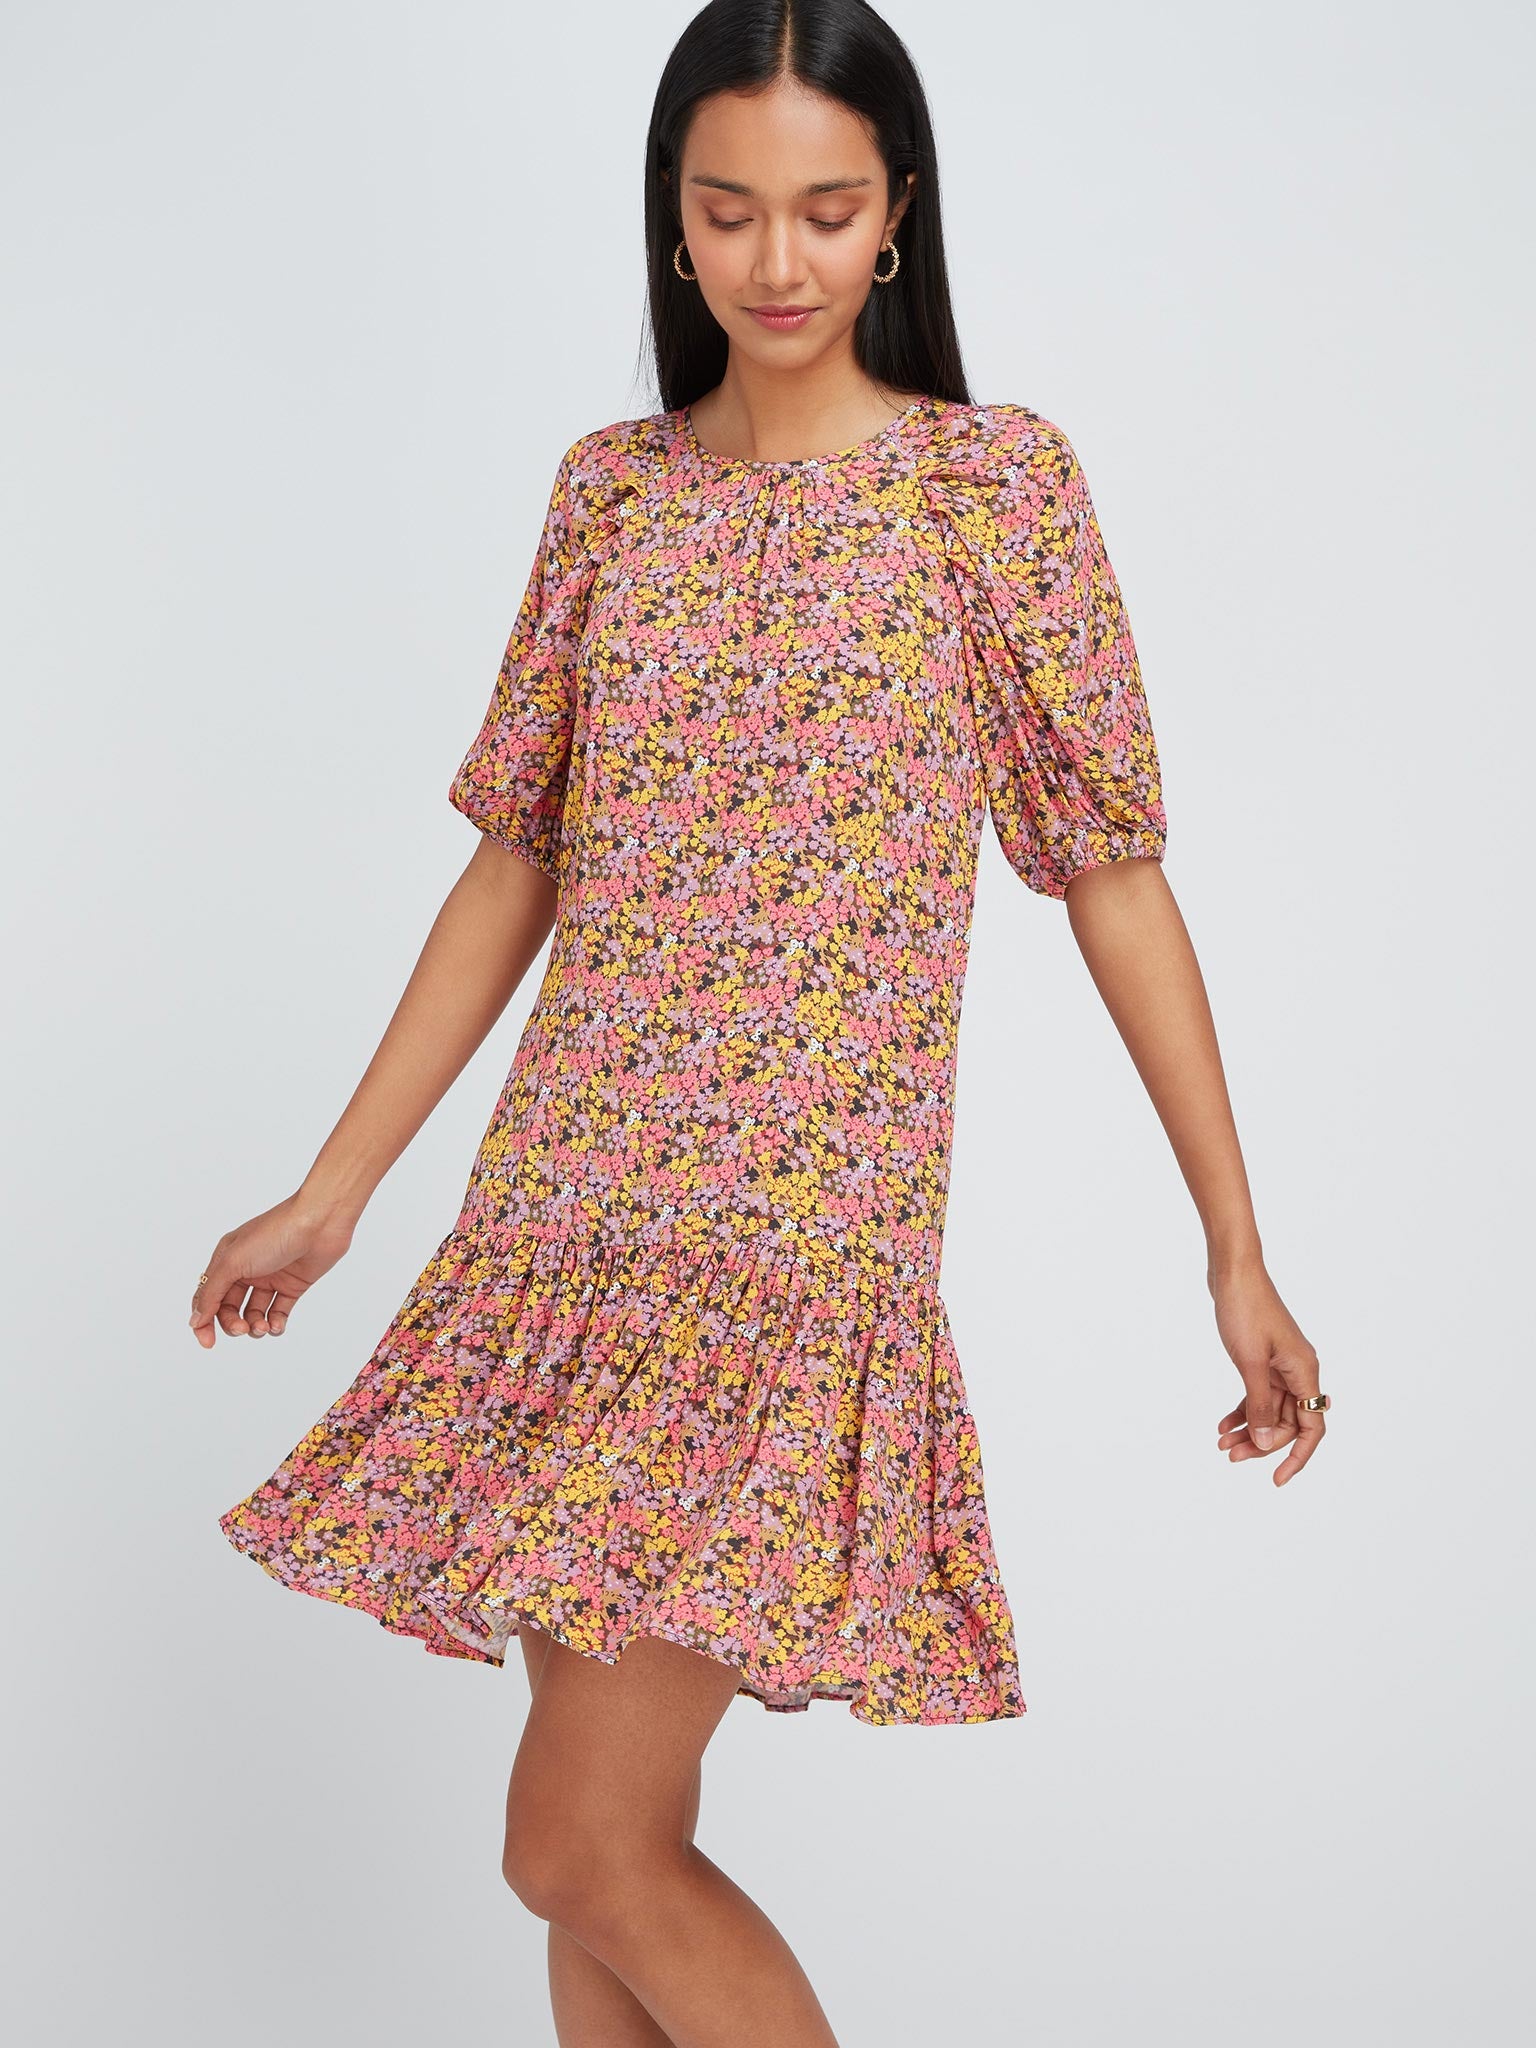 Blossom Mini Dress in Cluster Floral Print